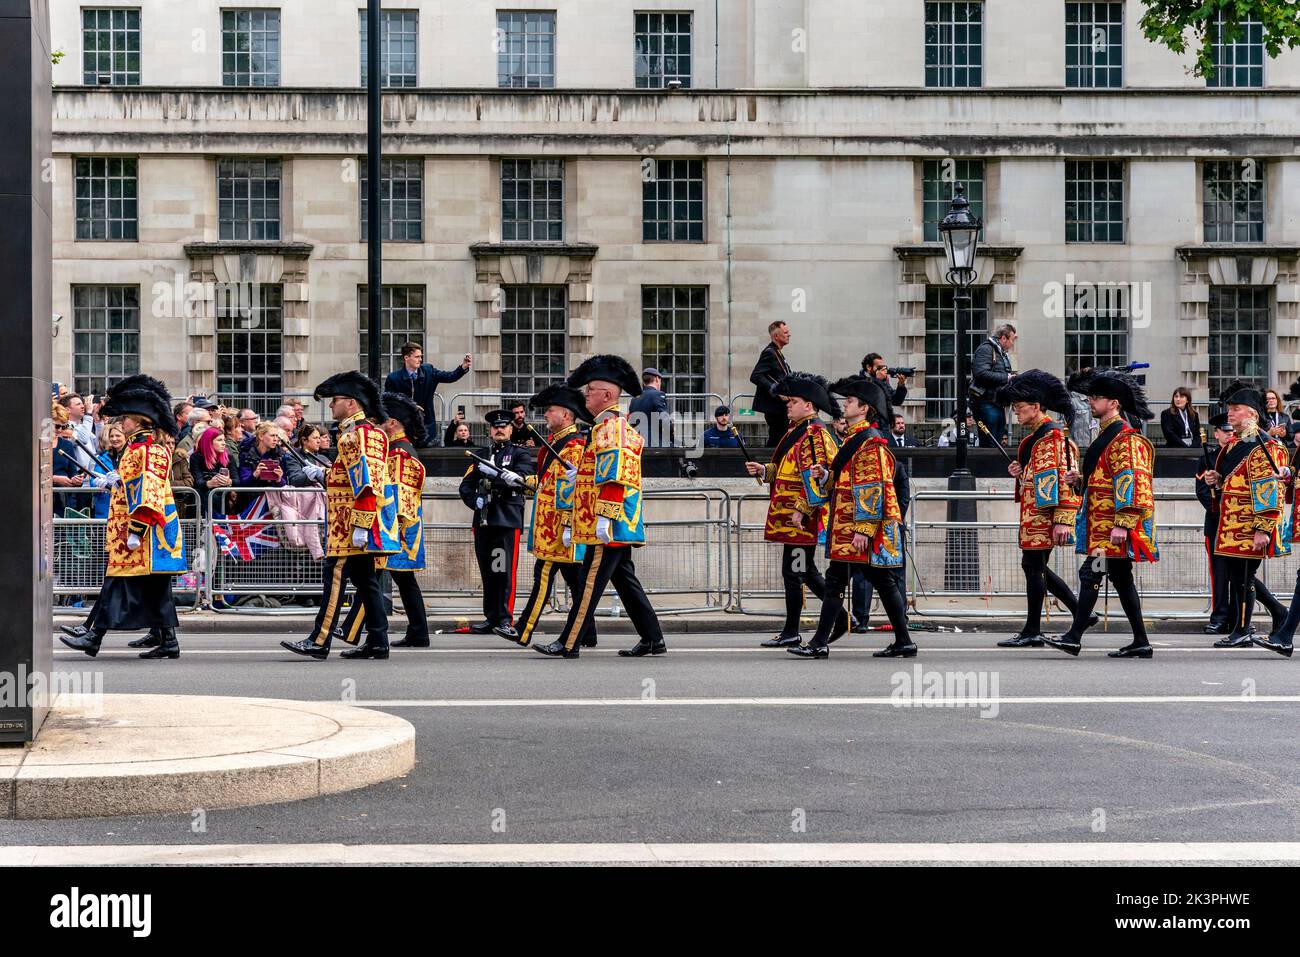 The King's/Royal Heralds Take Part In Queen Elzabeth's Funeral Procession, Whitehall, London, UK. Stock Photo